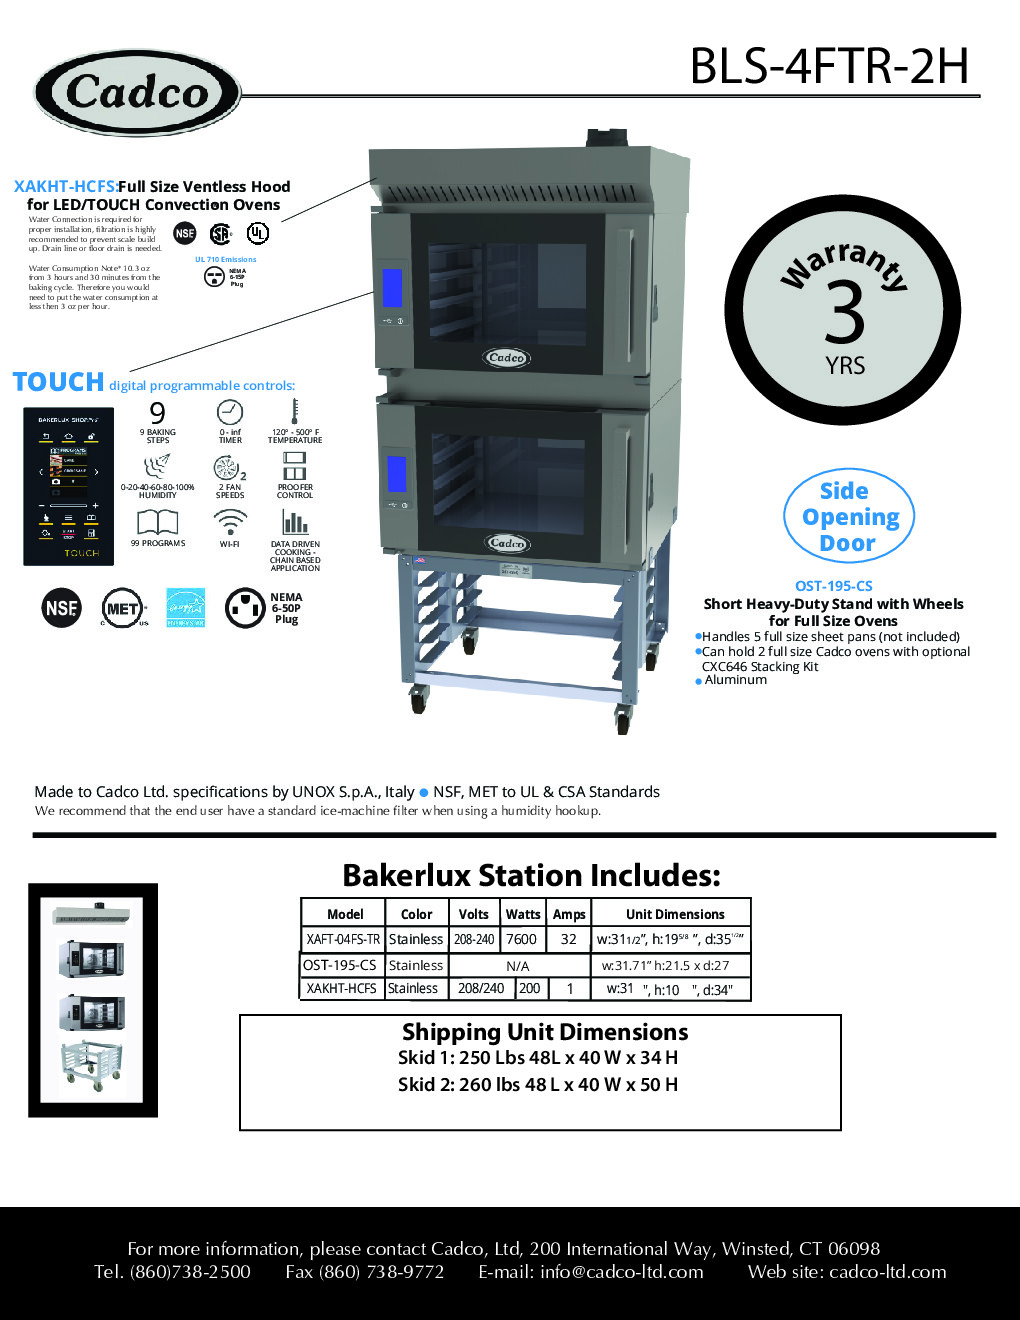 Cadco BLS-4FTR-2H Double-Deck Electric Convection Oven w/ Digital Touch Controls, Full-Size